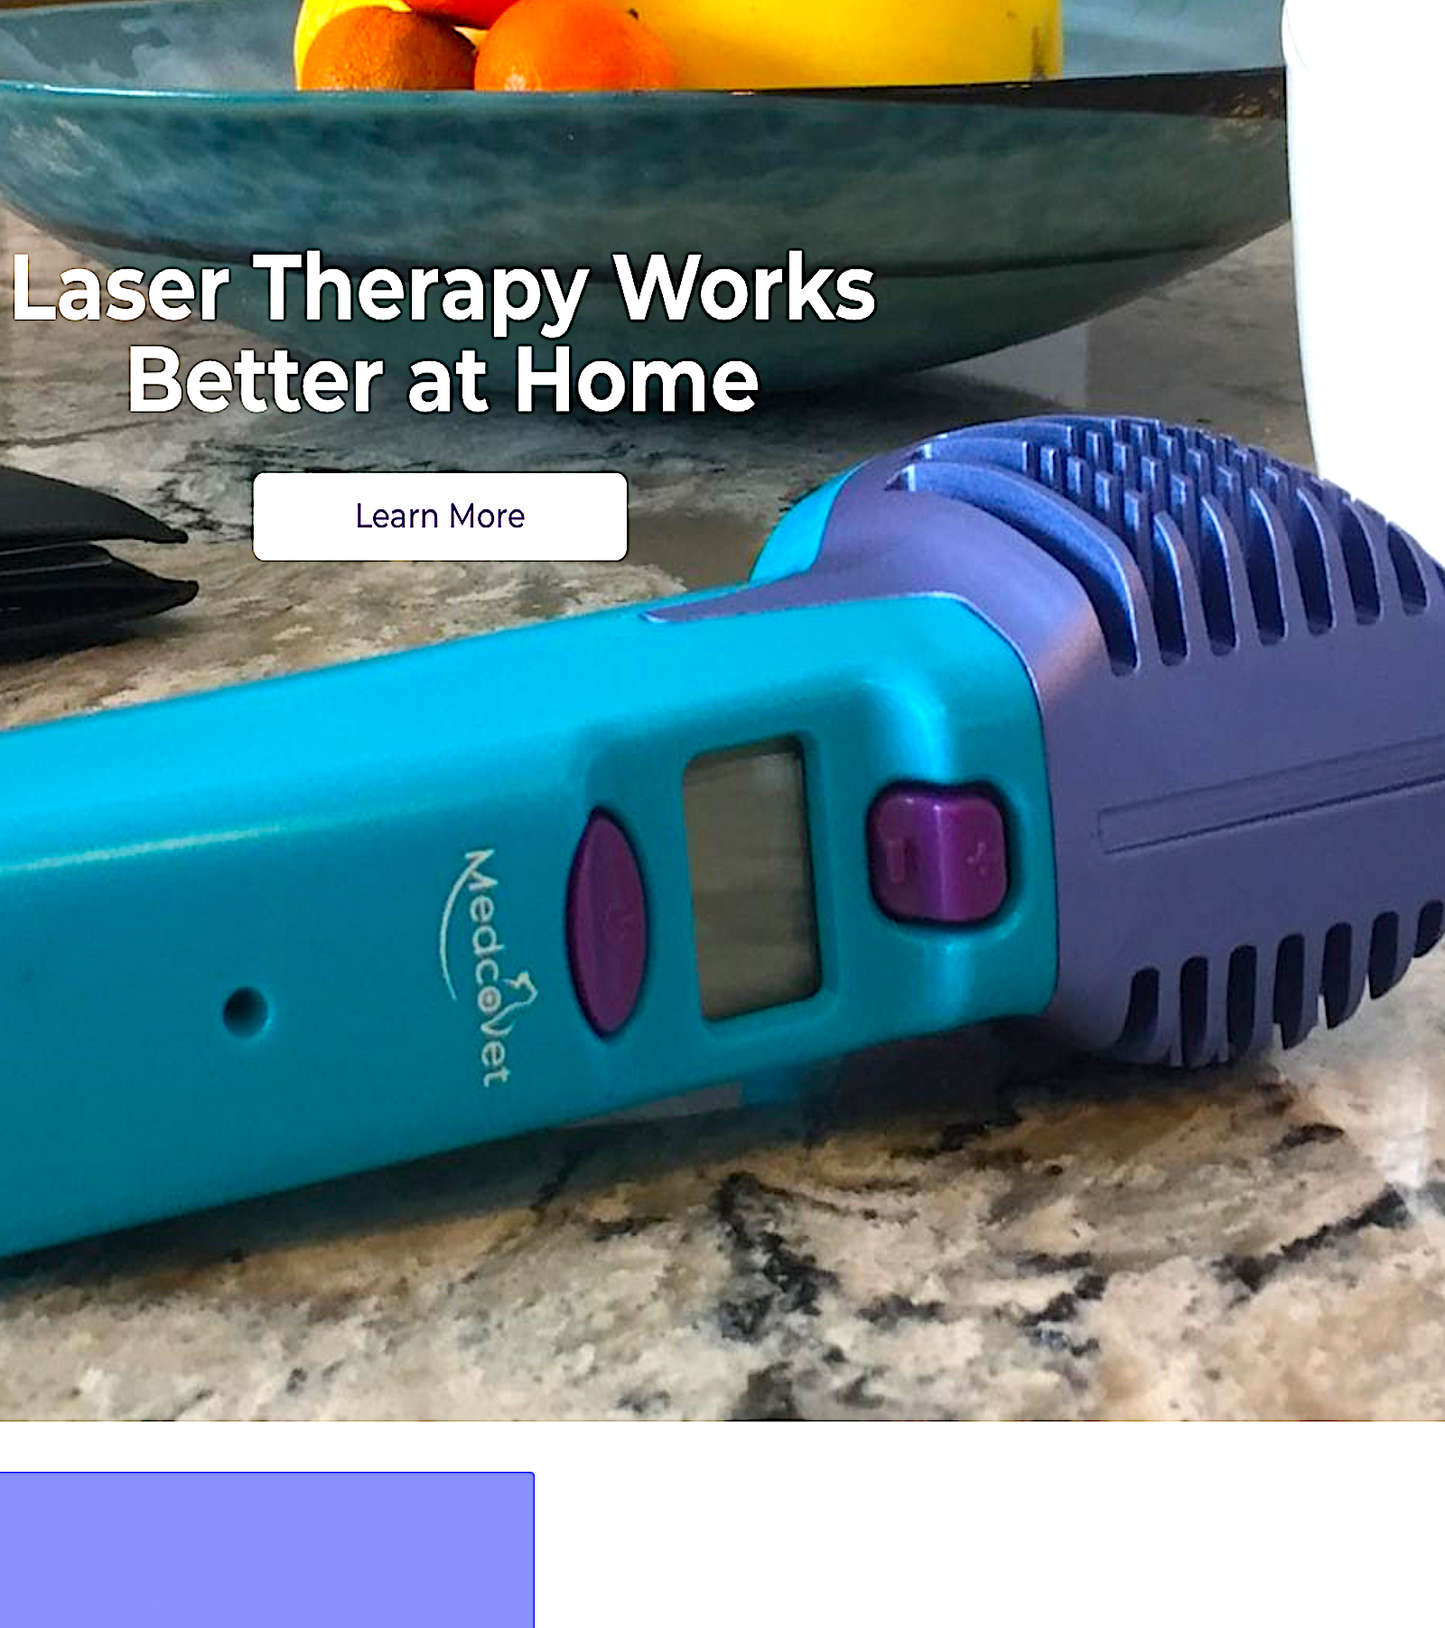 MEDCOVET LUMA: laser therapy works better at home